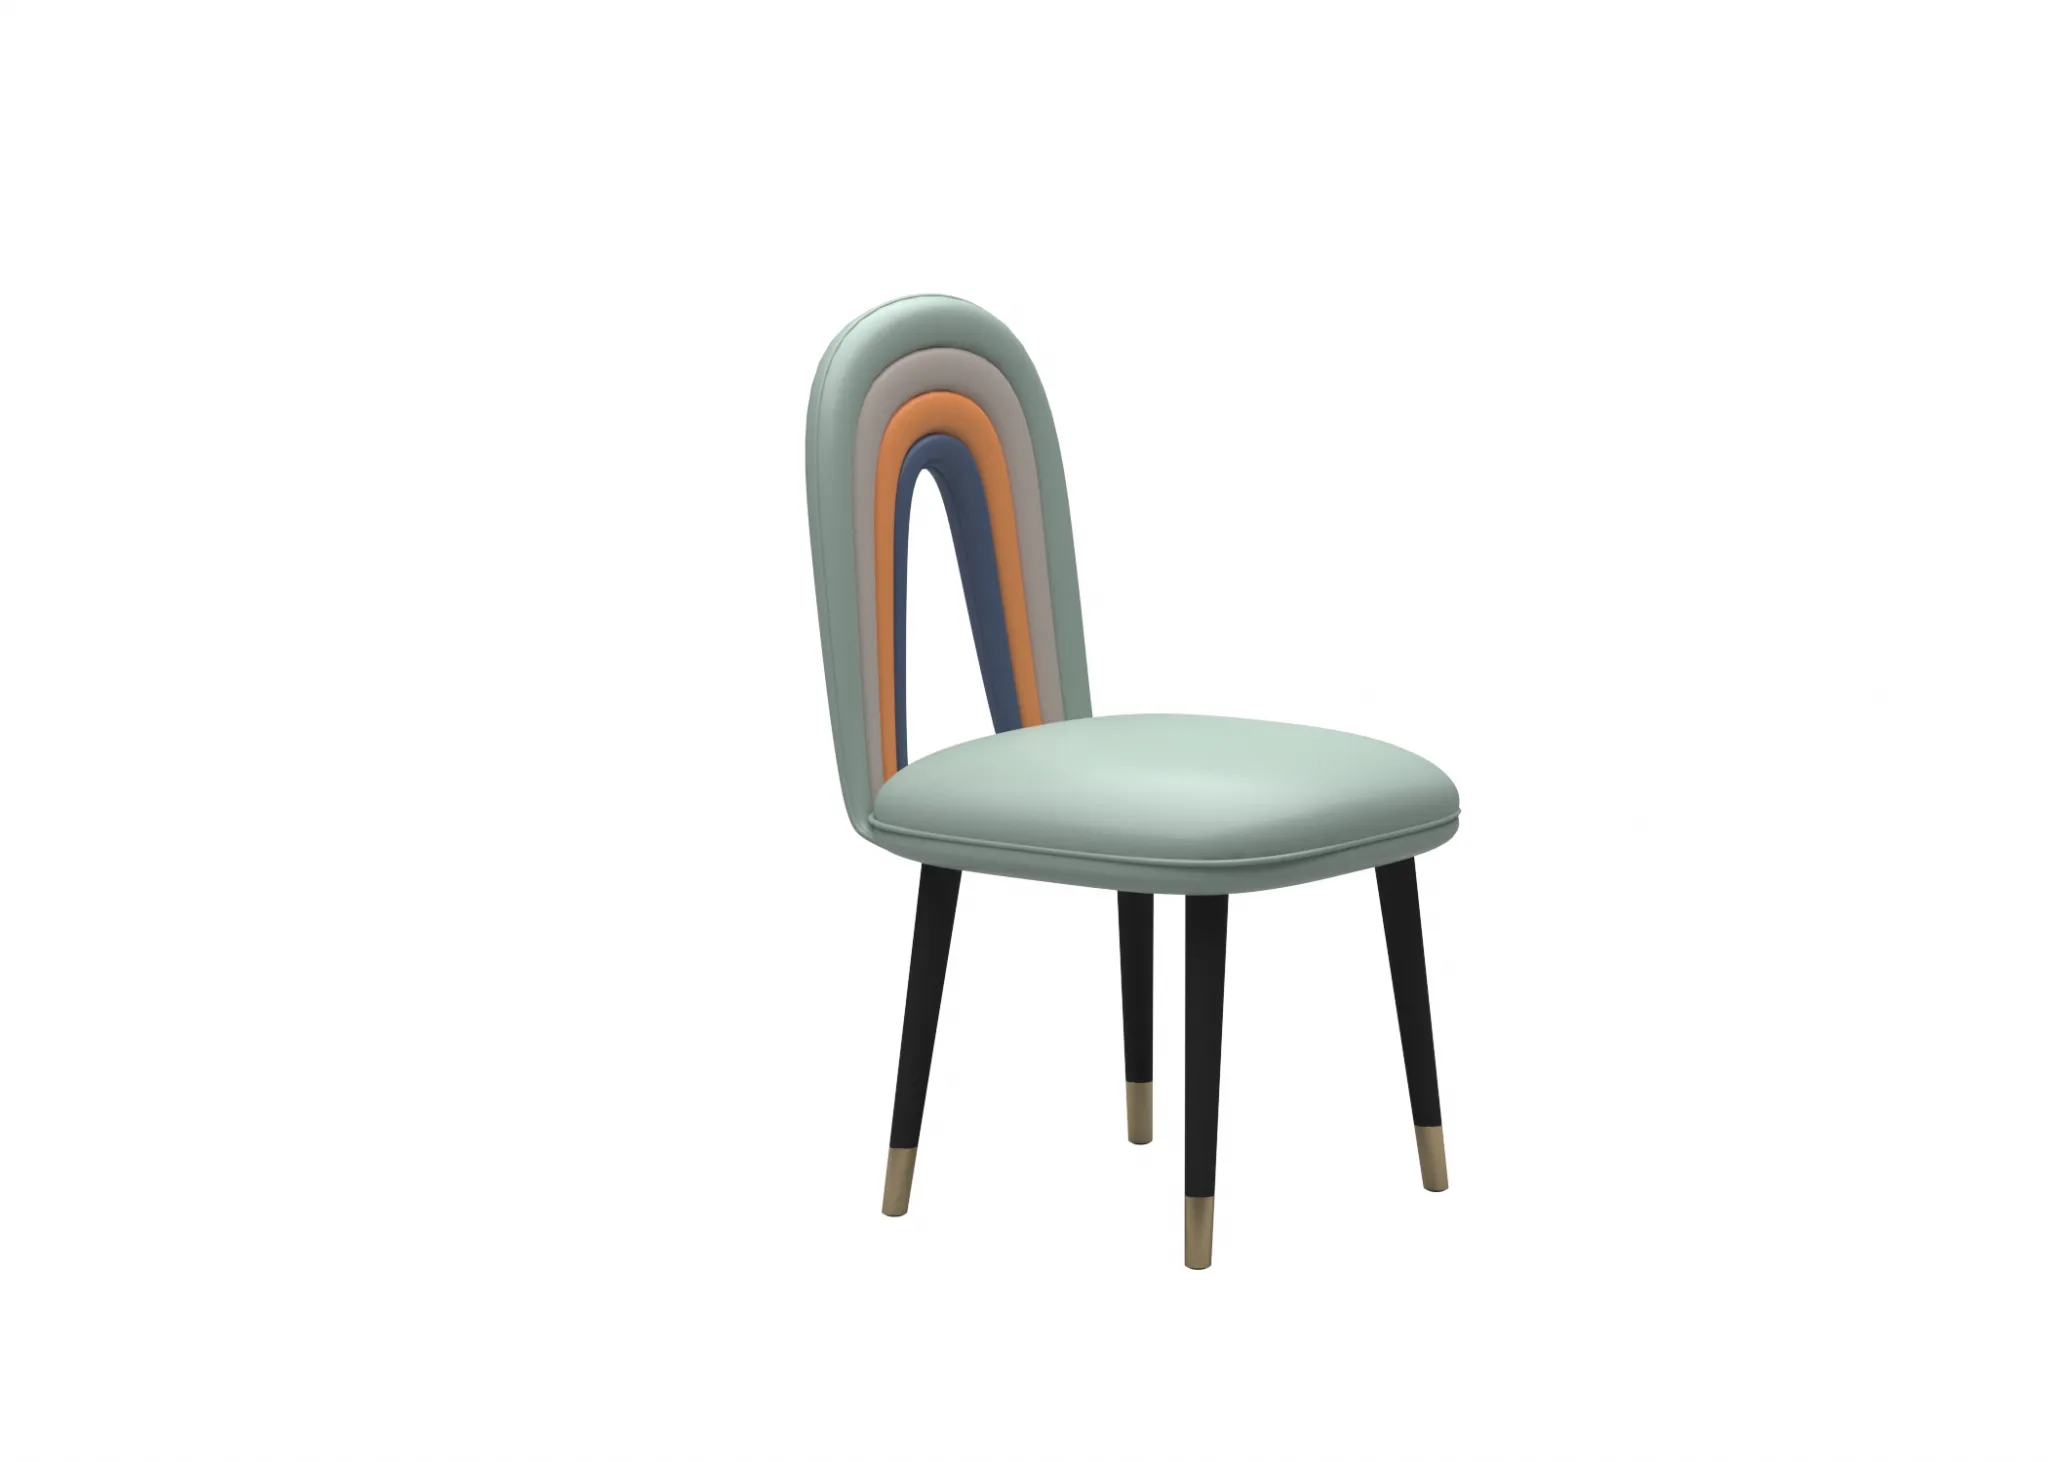 FURNITURE 3D MODELS – CHAIRS – 0441